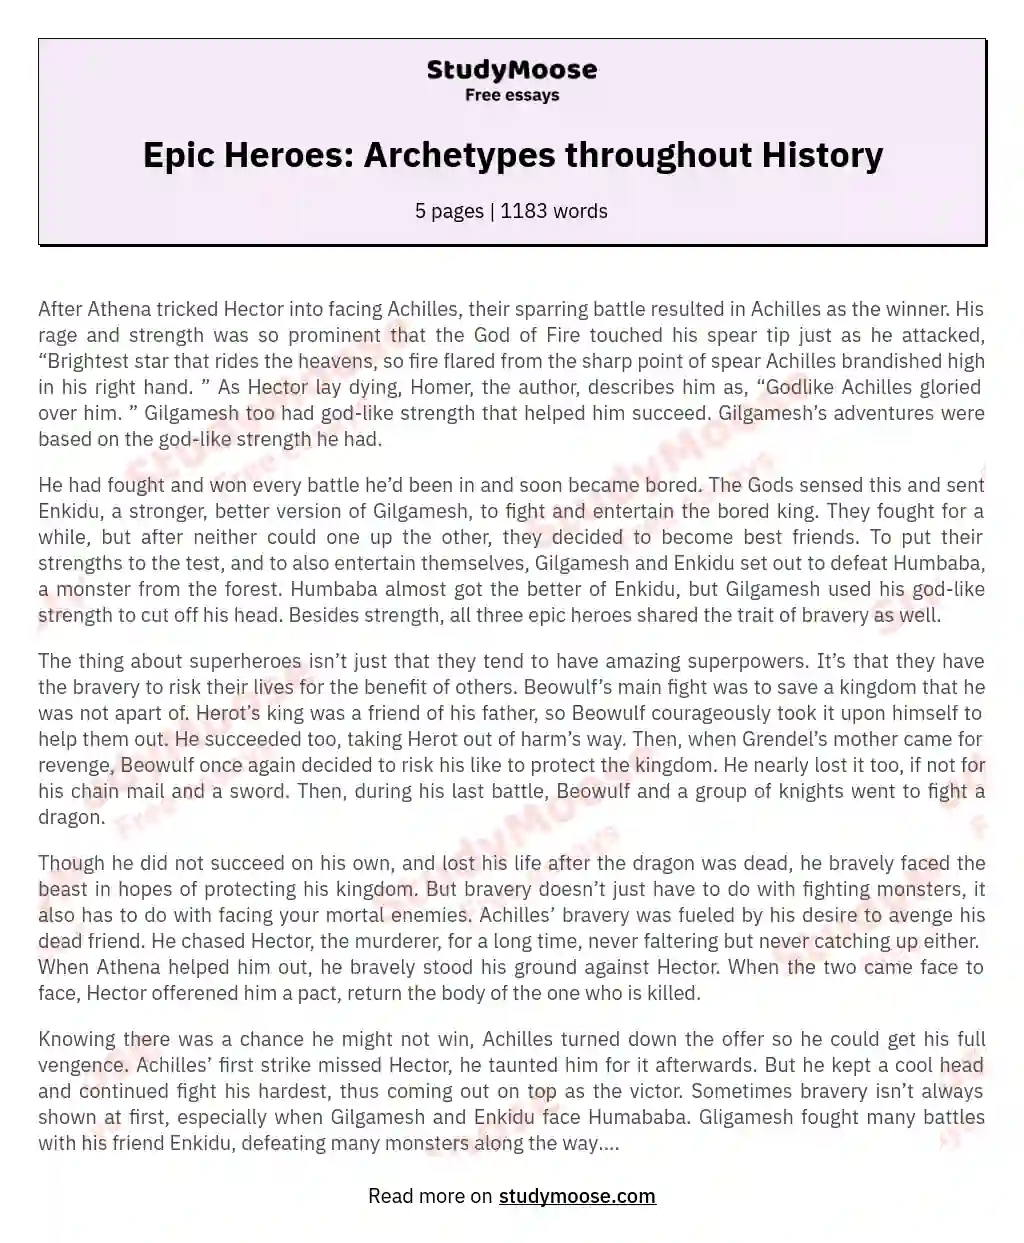 Epic Heroes: Archetypes throughout History essay